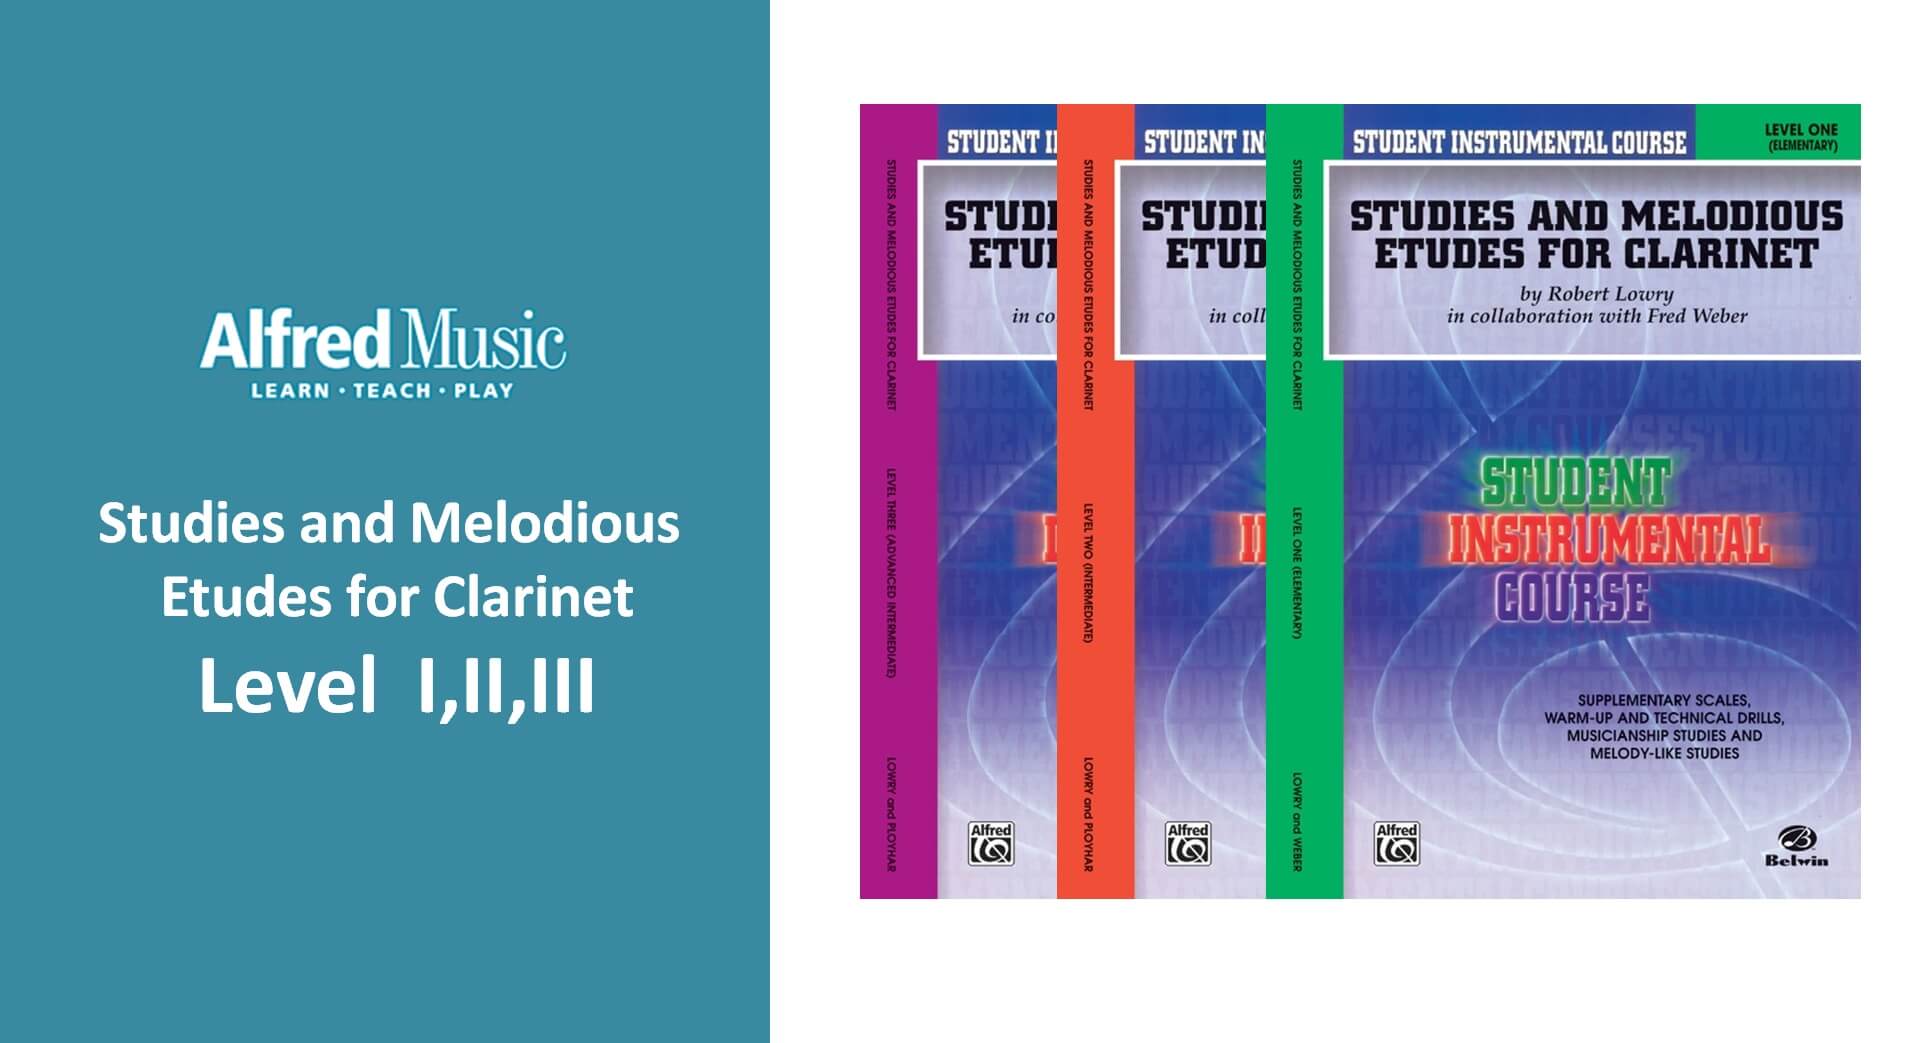 Student Instrumental Course: Studies and Melodious Etudes for Clarinet